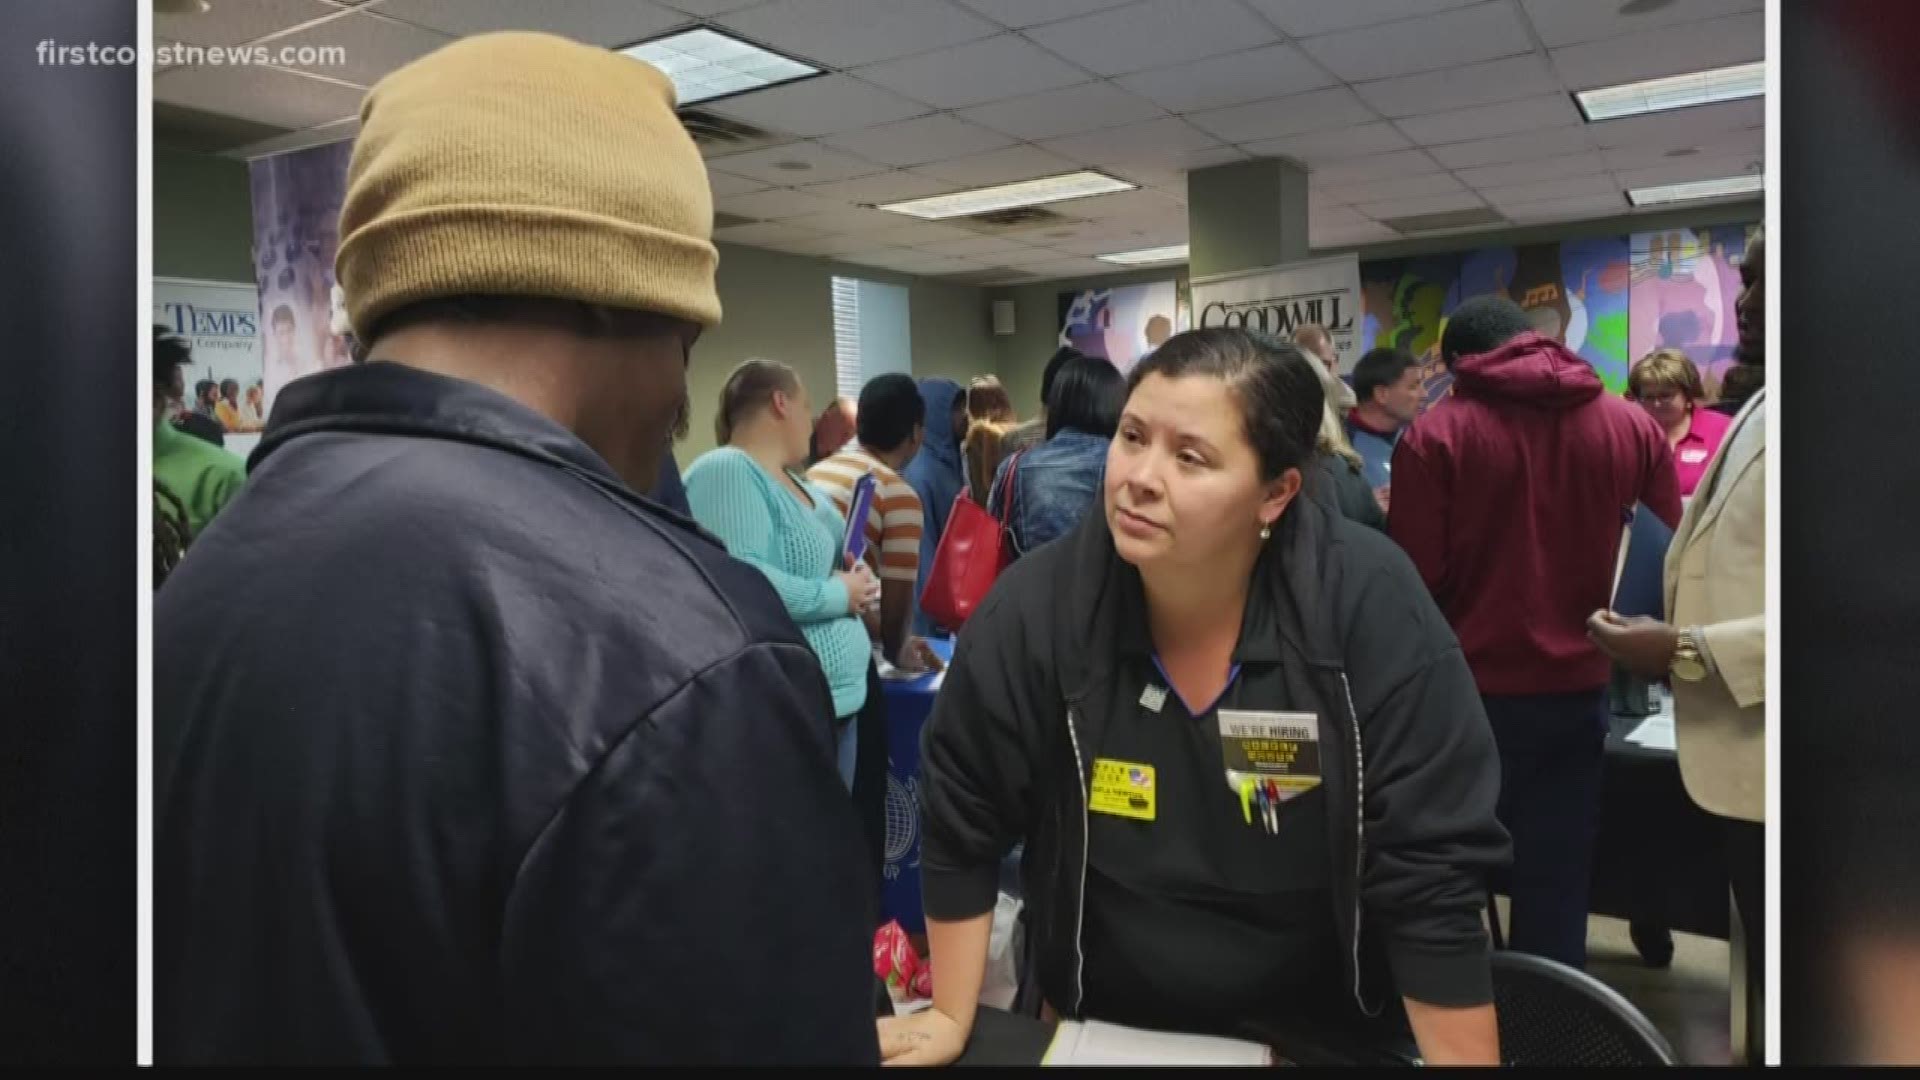 Some local employers joined the nonprofit community to promote equal opportunity and second chances Wednesday. The Second Chance Job Fair was hosted at the Clara White Mission.